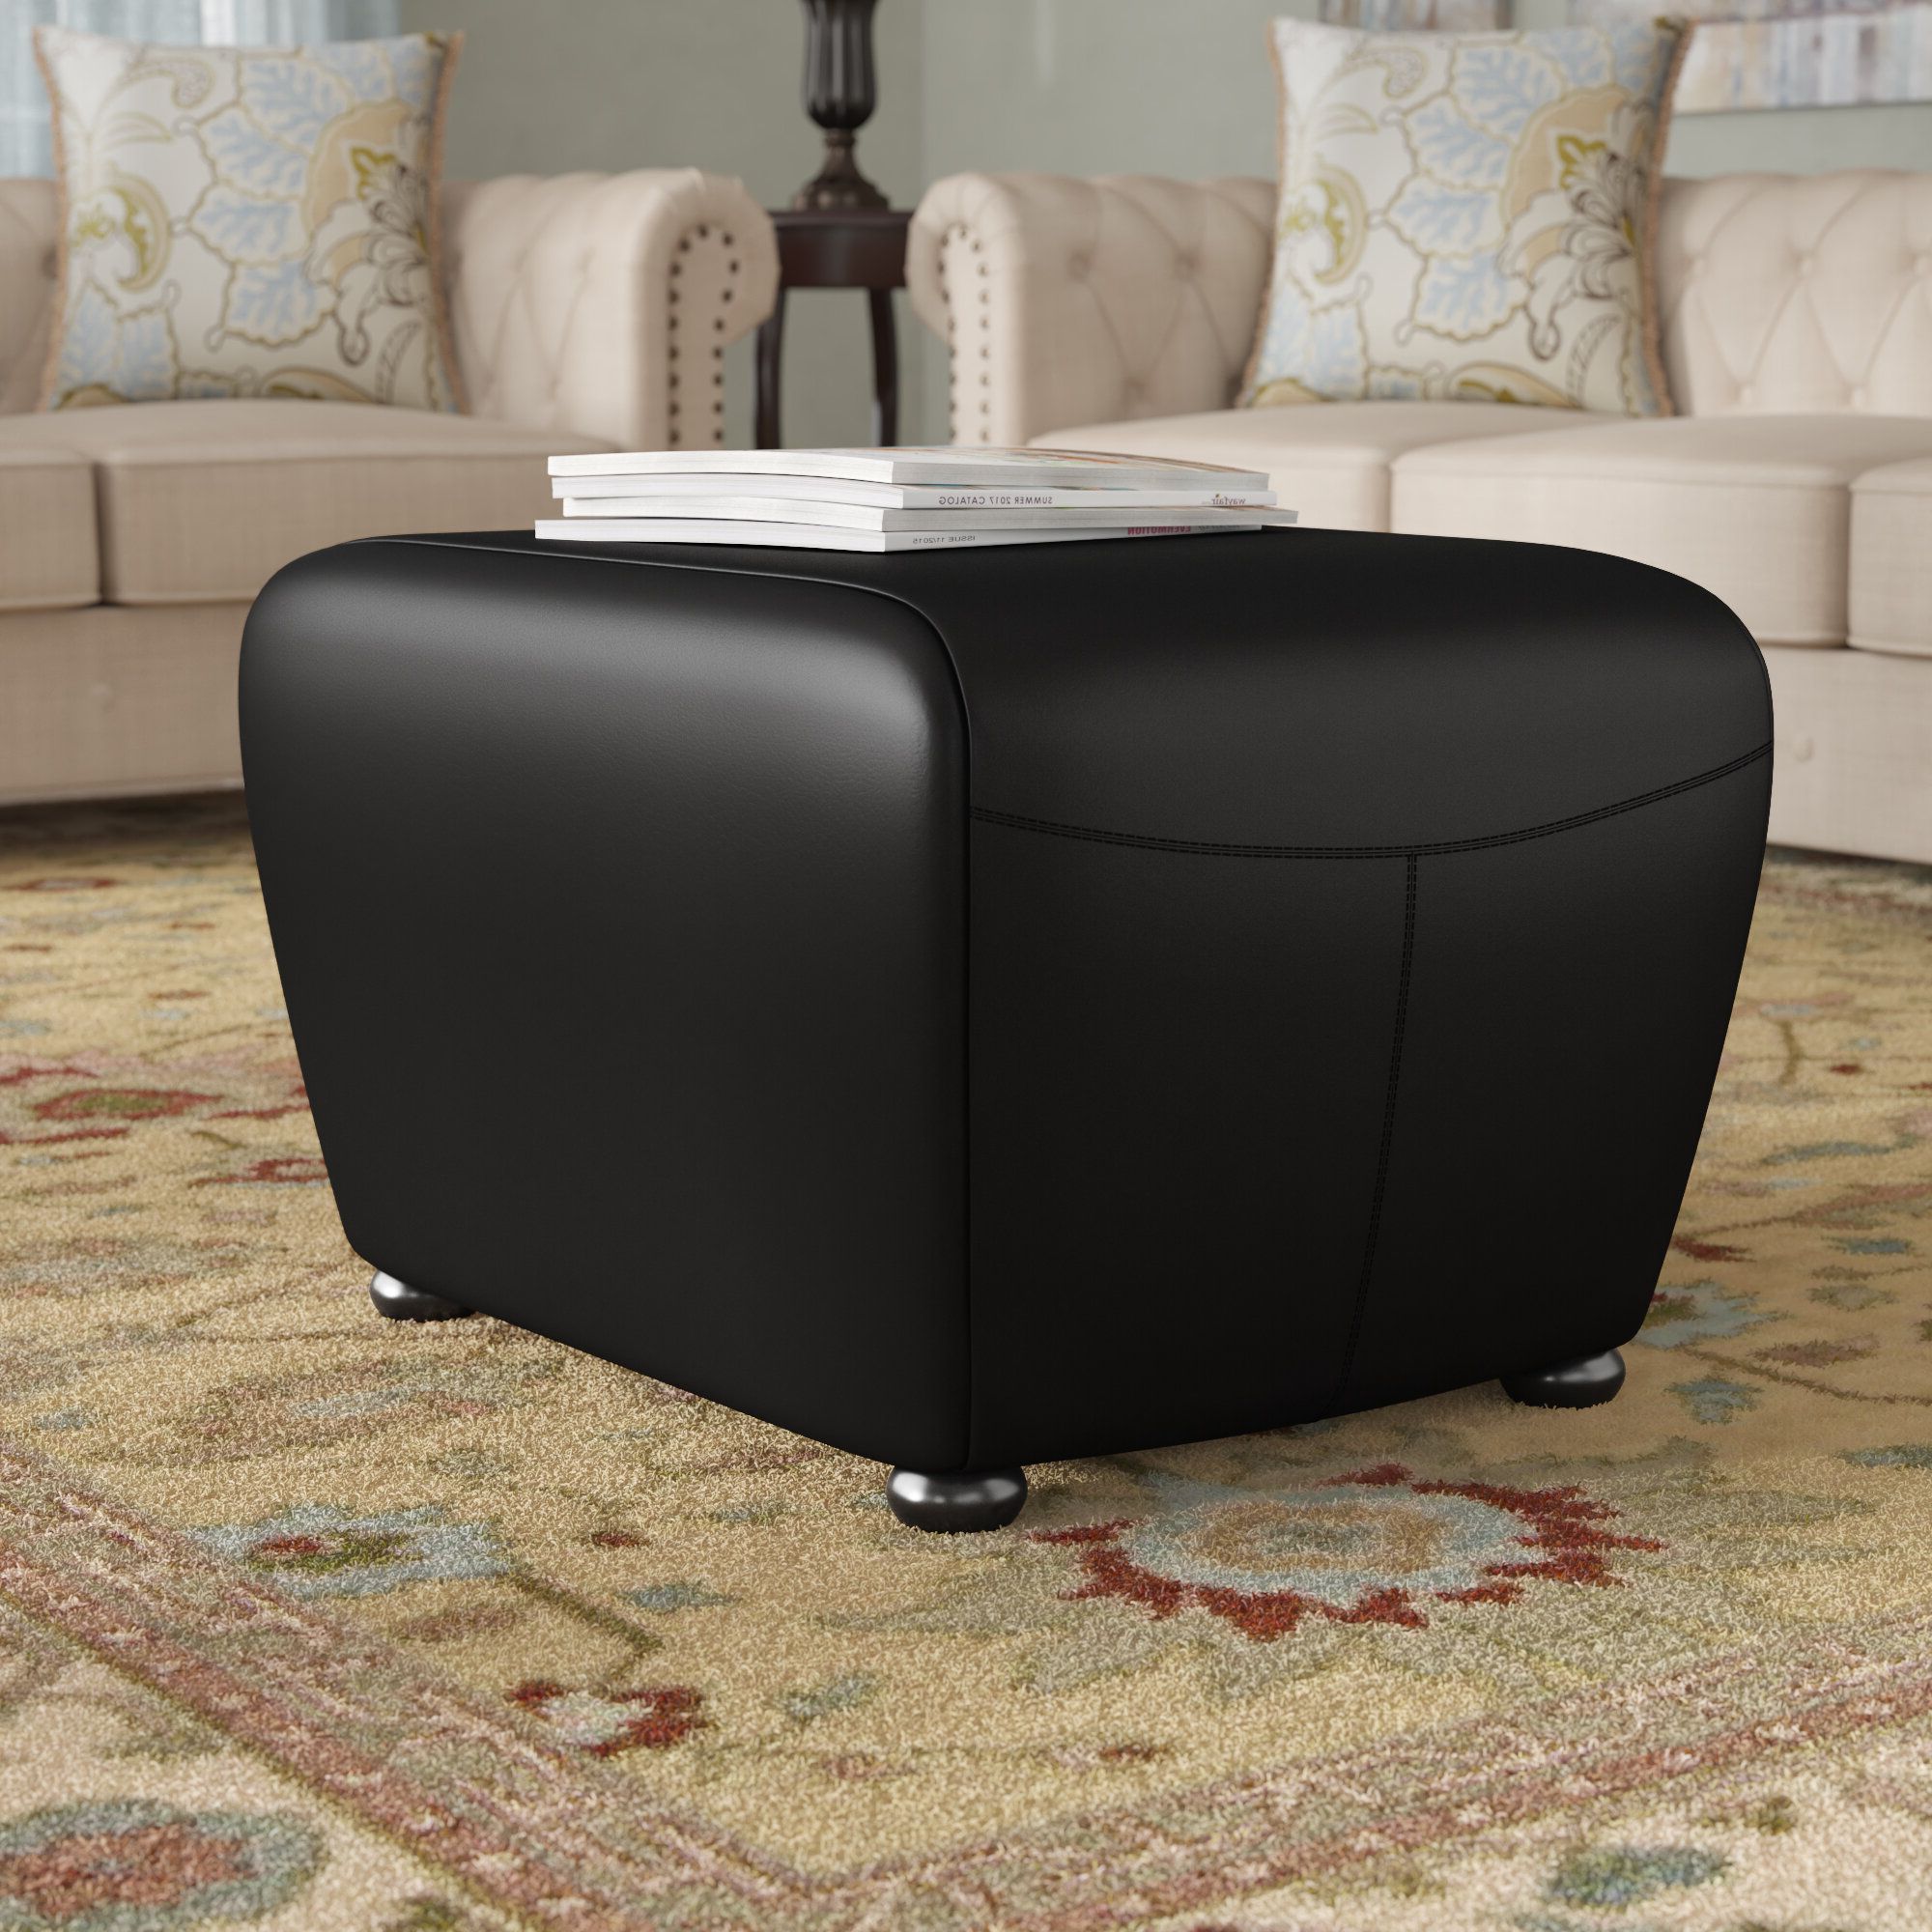 Darby Home Co Madeleine Vegan Leather Ottoman & Reviews – Wayfair Canada With Regard To Well Liked Black Leather Wrapped Ottomans (View 11 of 15)